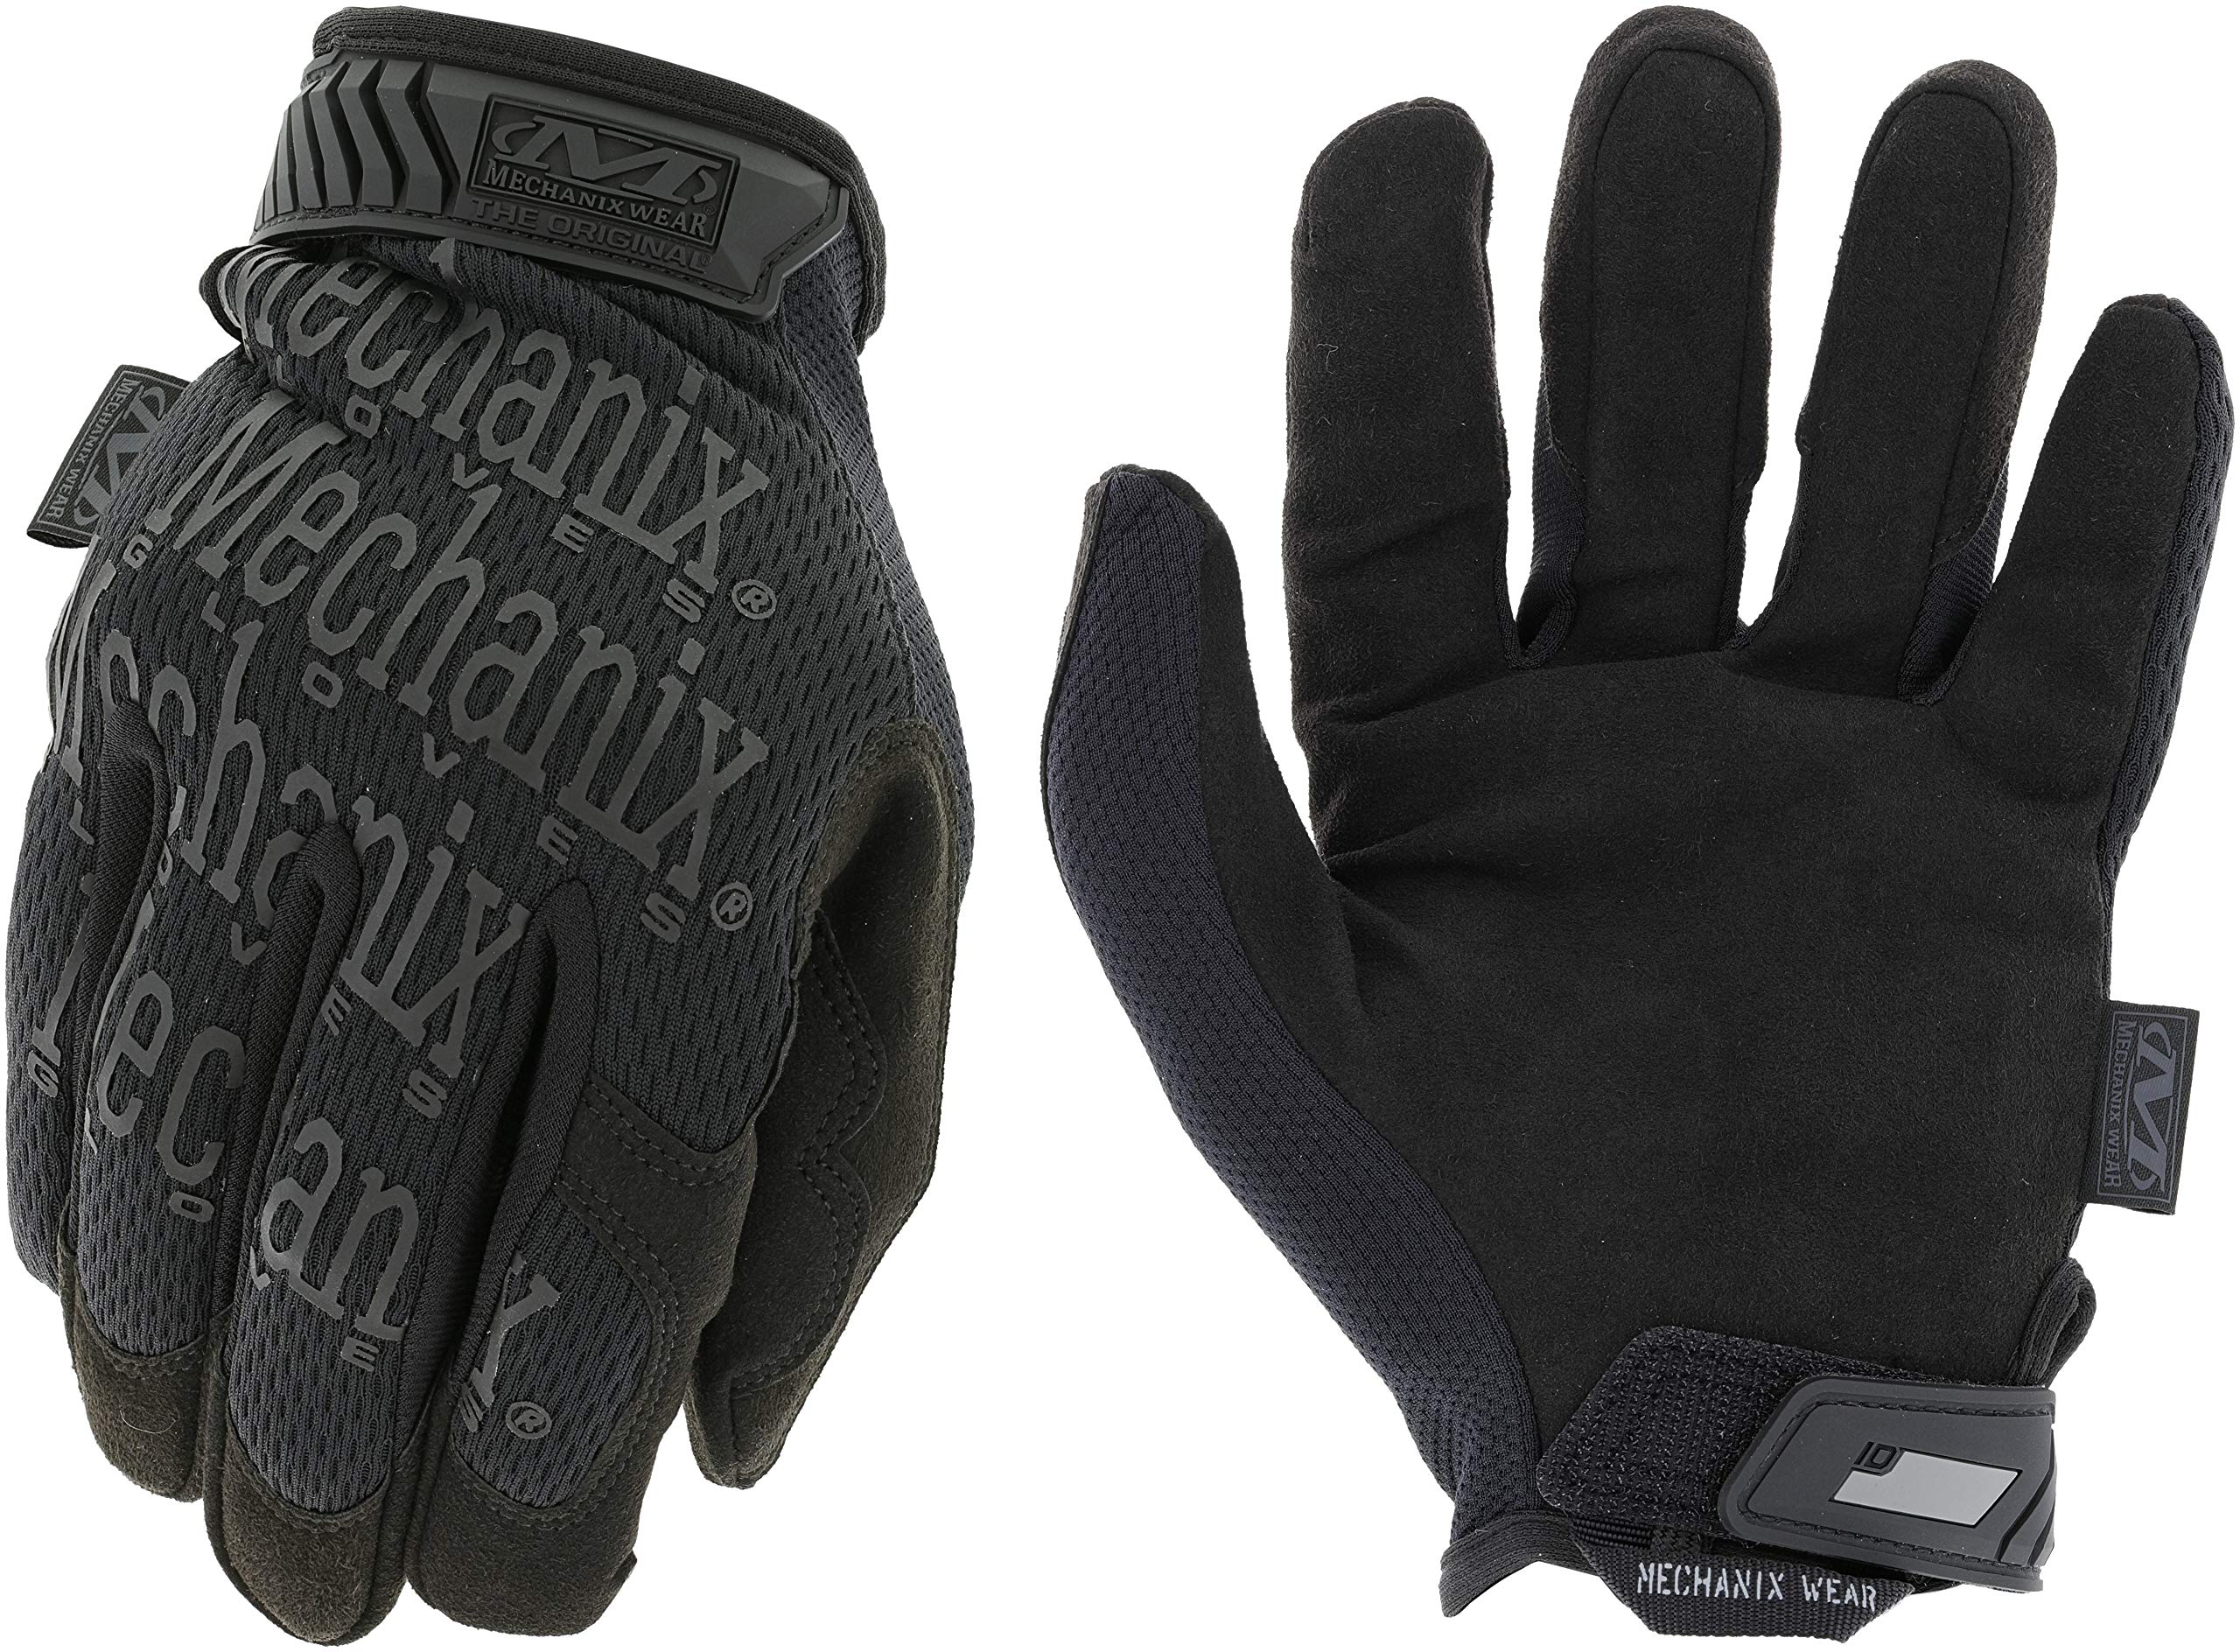 Mechanix Wear: The Original Covert Tactical Work Gloves with Secure Fit, Flexible Grip for Multi-Purpose Use, Durable Touchscreen Safety Gloves for Men (Black, Medium)